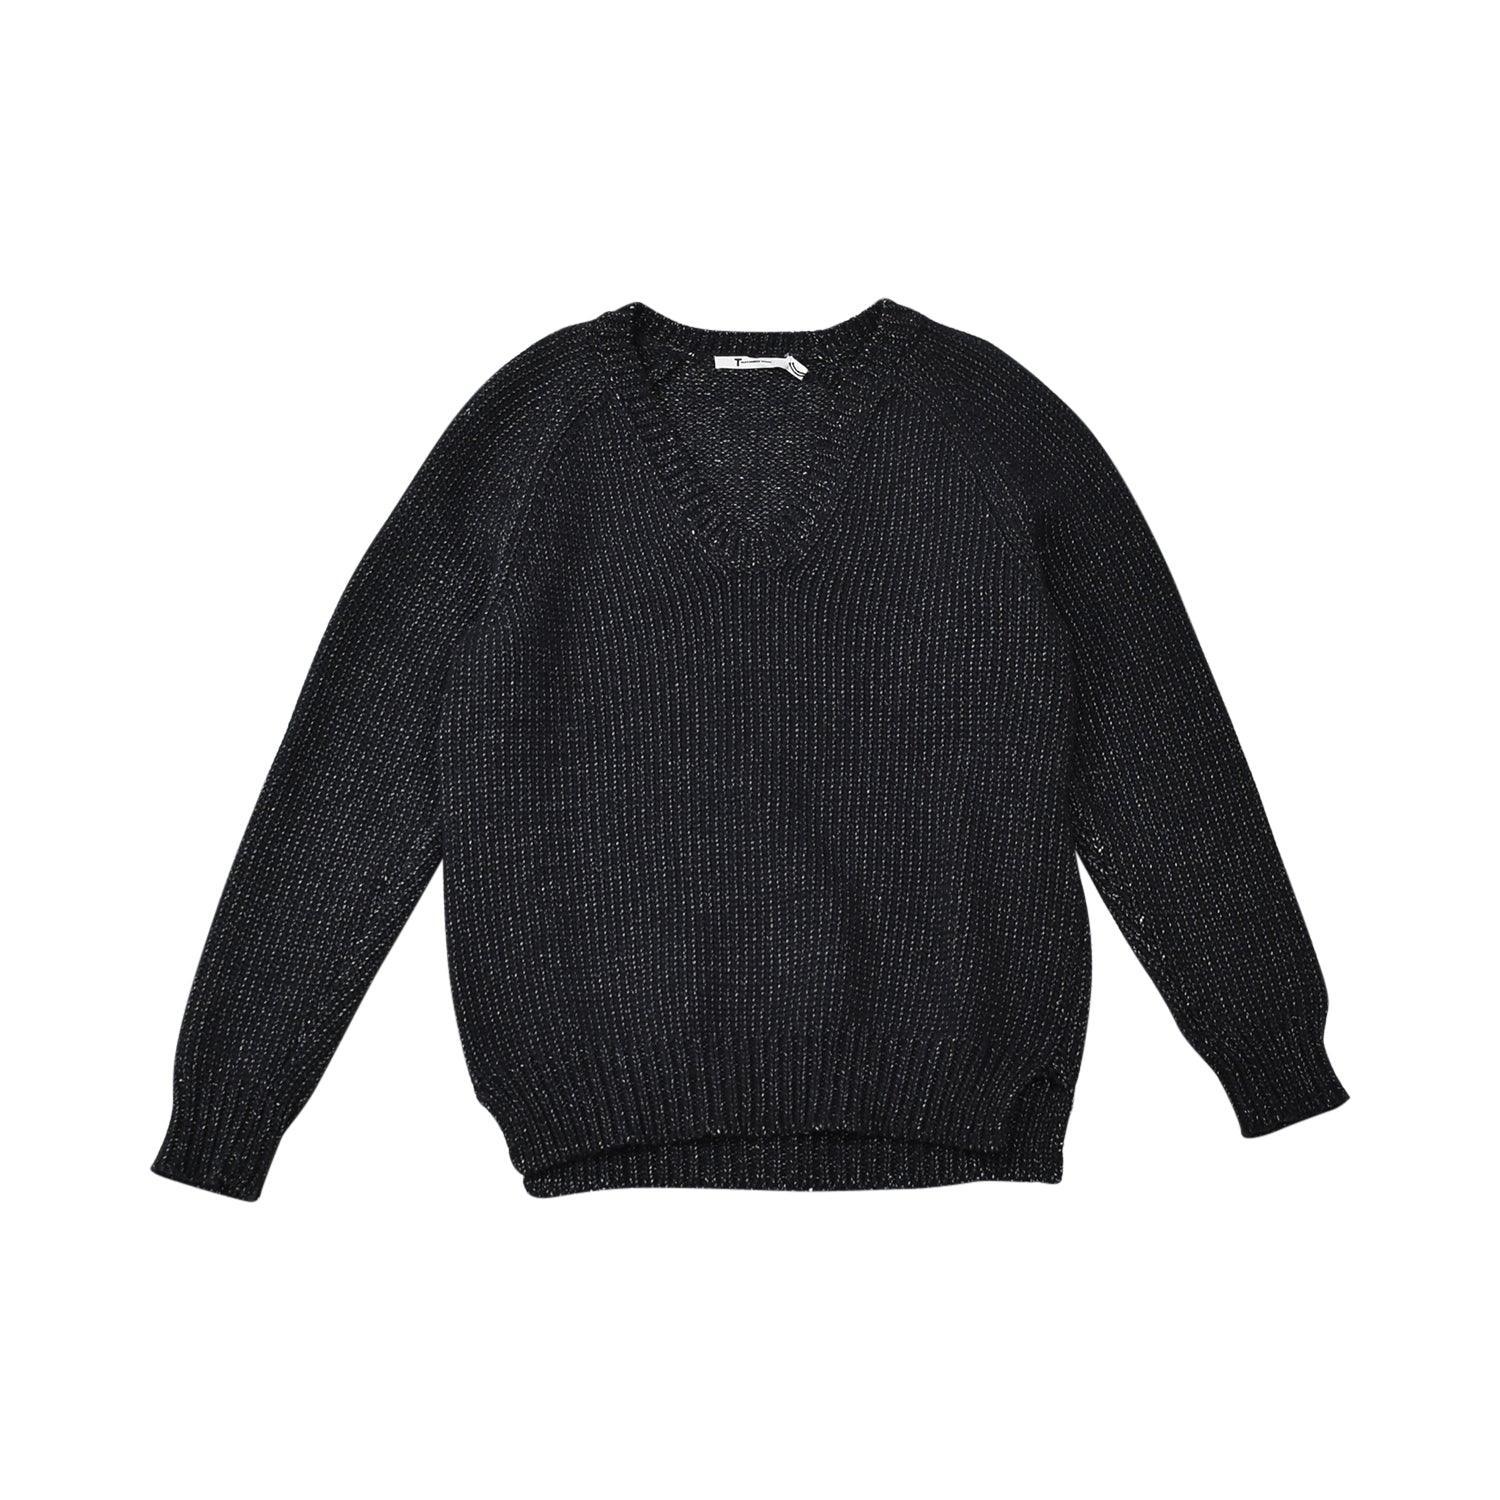 T By Alexander Wang Sweater - Women's S - Fashionably Yours